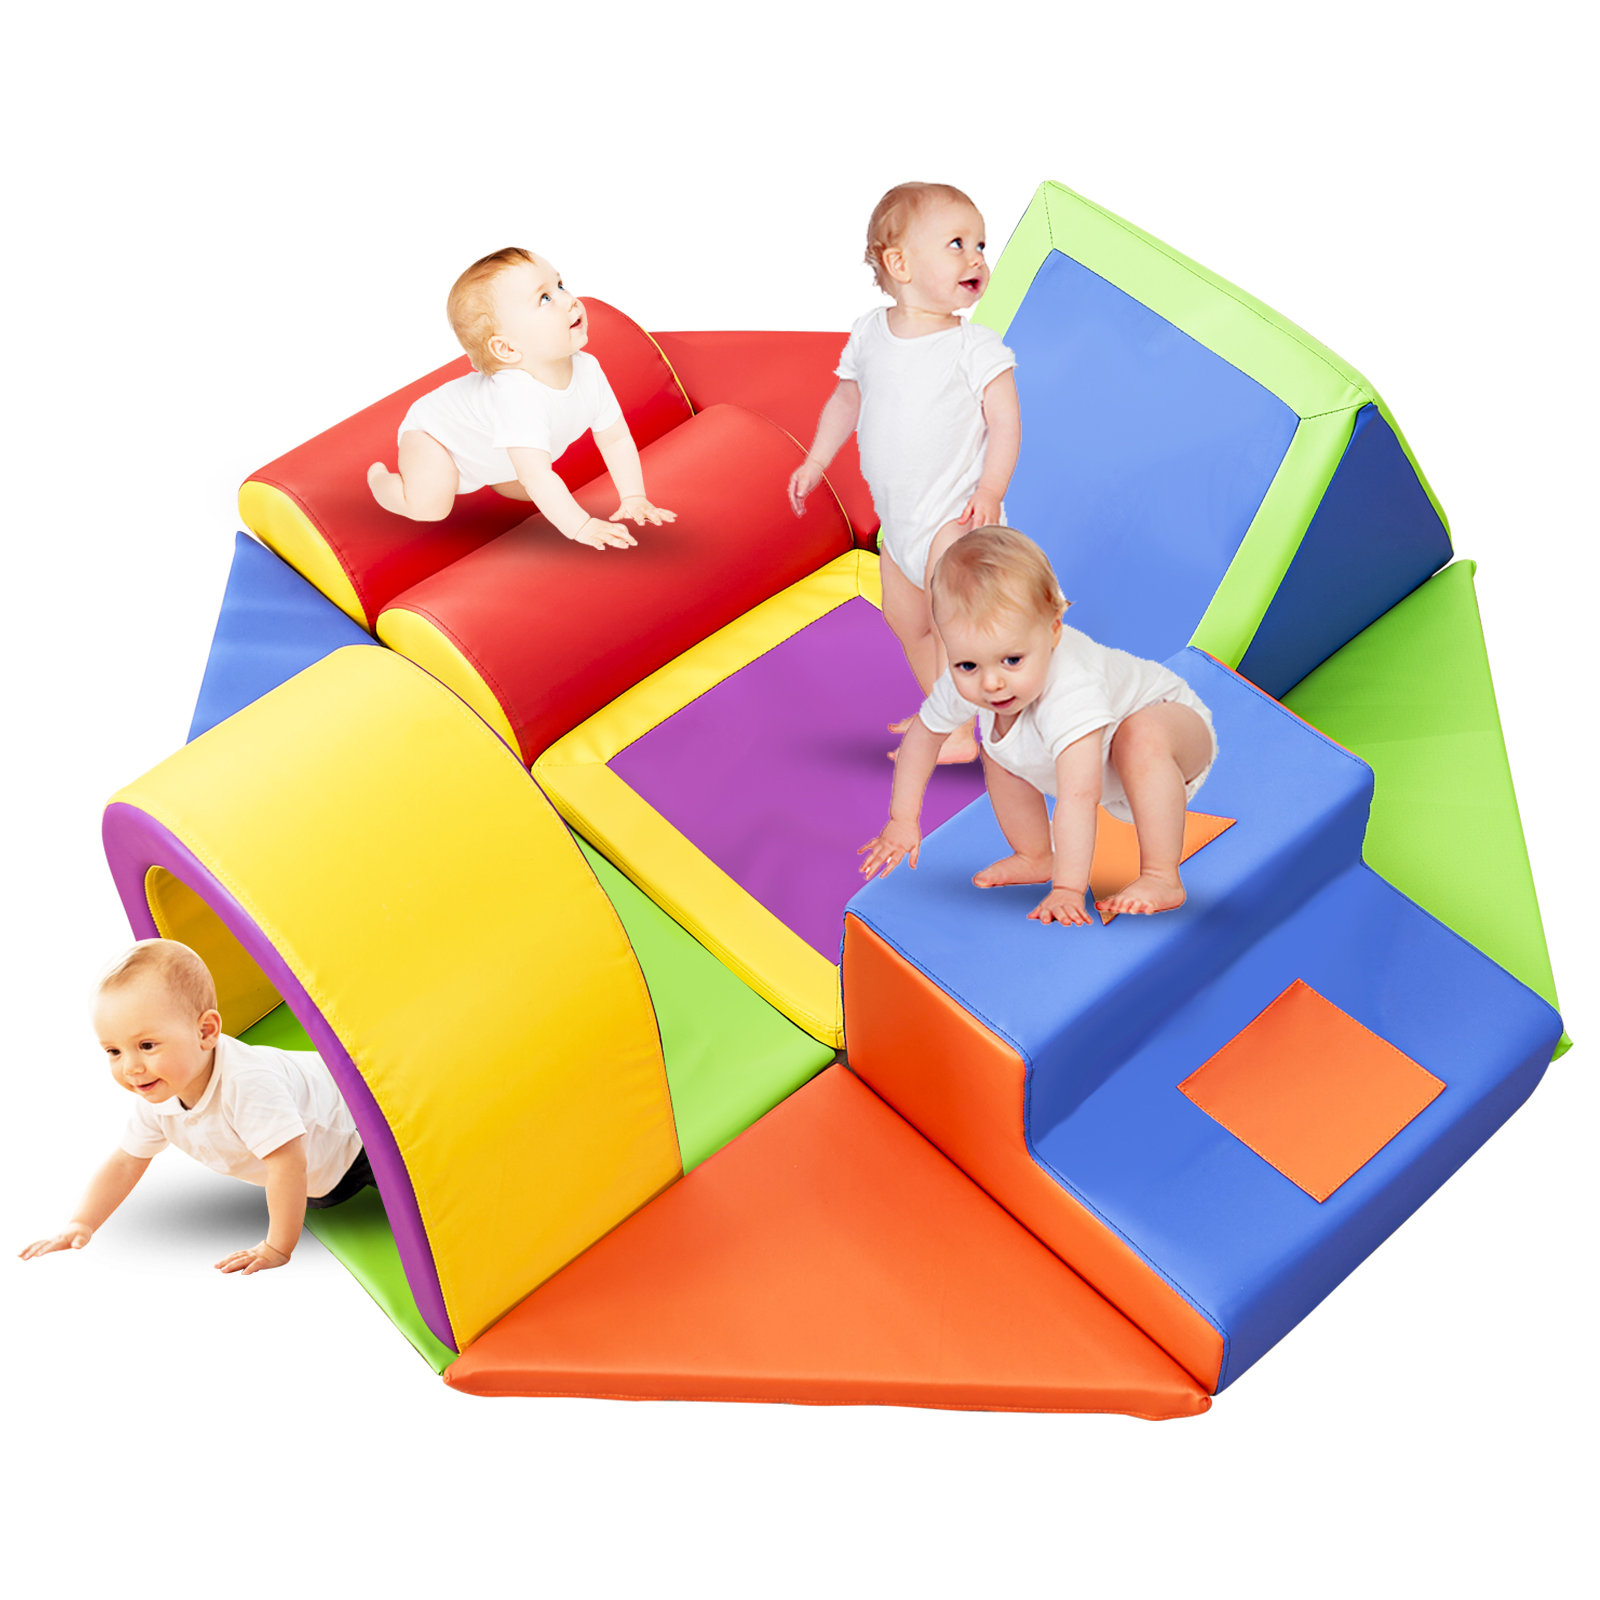  Climb and Crawl Activity Play Set - Climbing Foam Shape Toy for  Toddlers 5 Piece Soft Zone Climbing Blocks, Safe Indoor Crawling Gym  Equipment for Toddler, Infant, Baby Waterproof and Easy